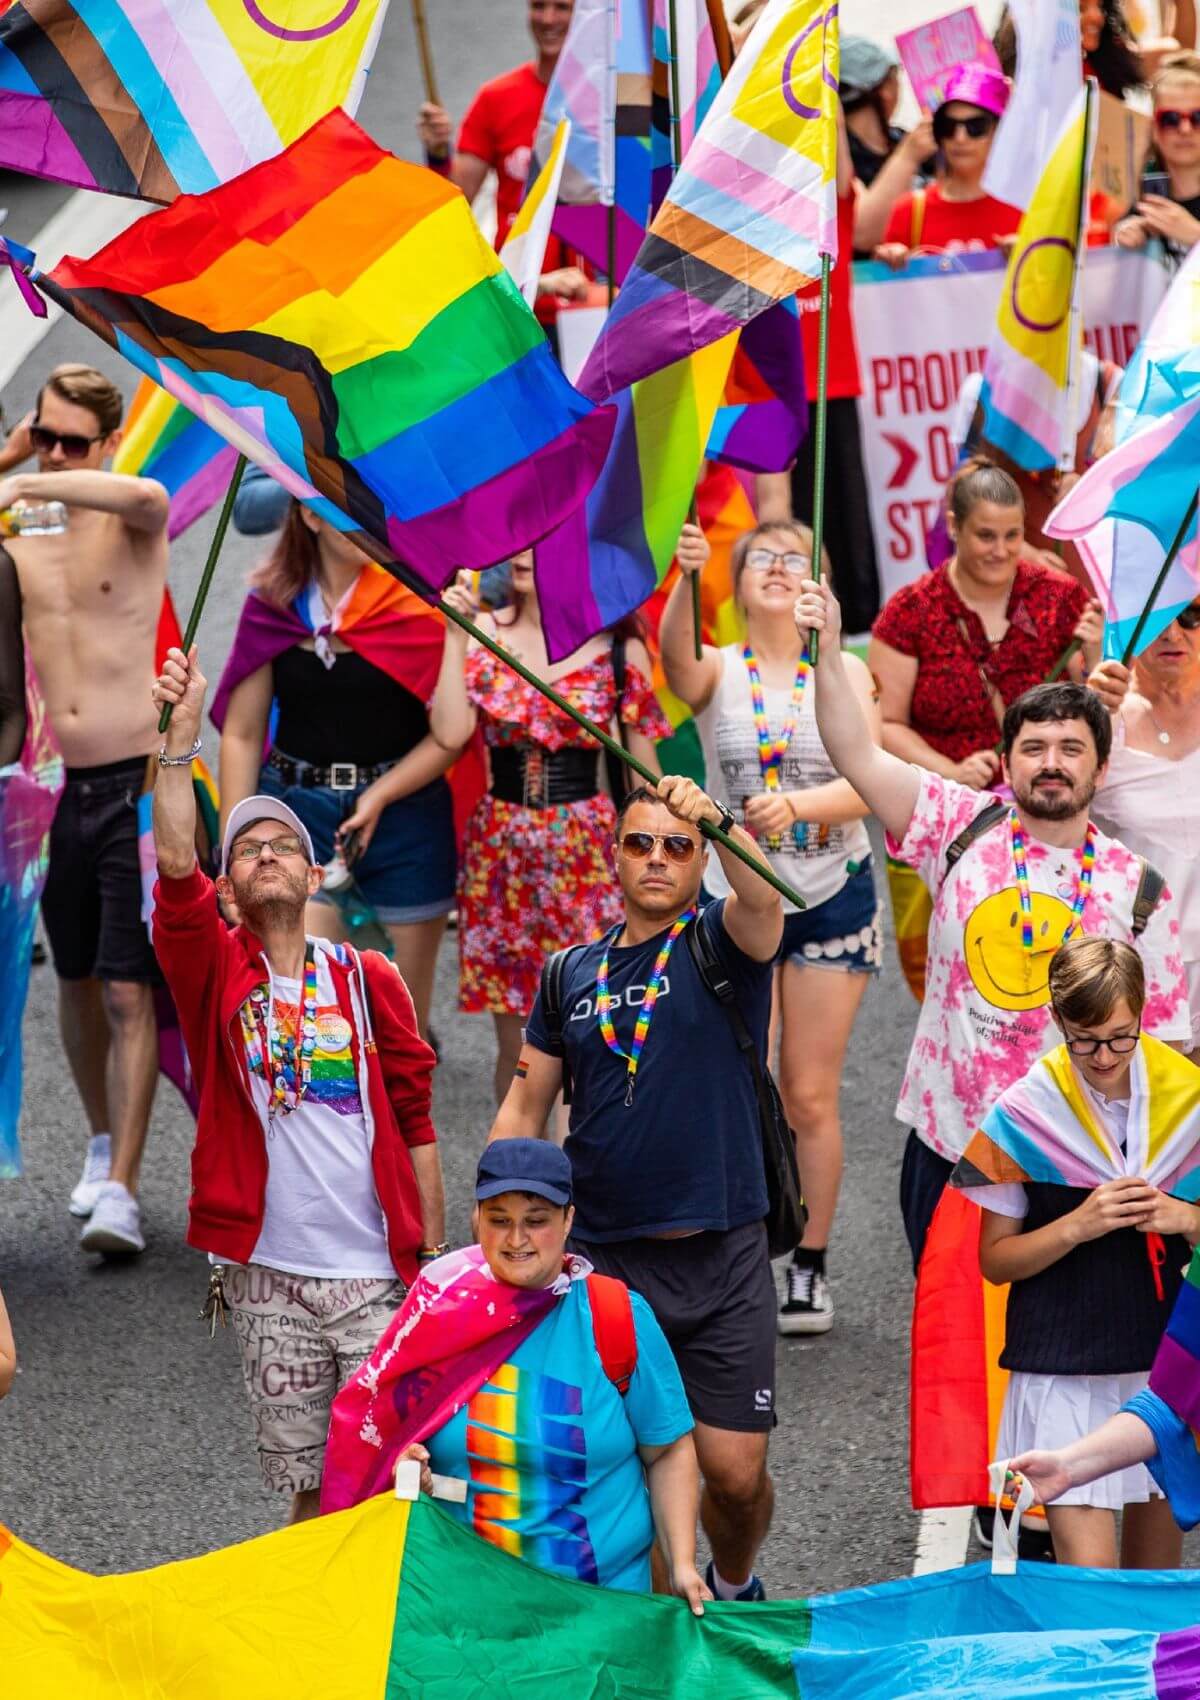 Visit Bristol Pride for a day out in June